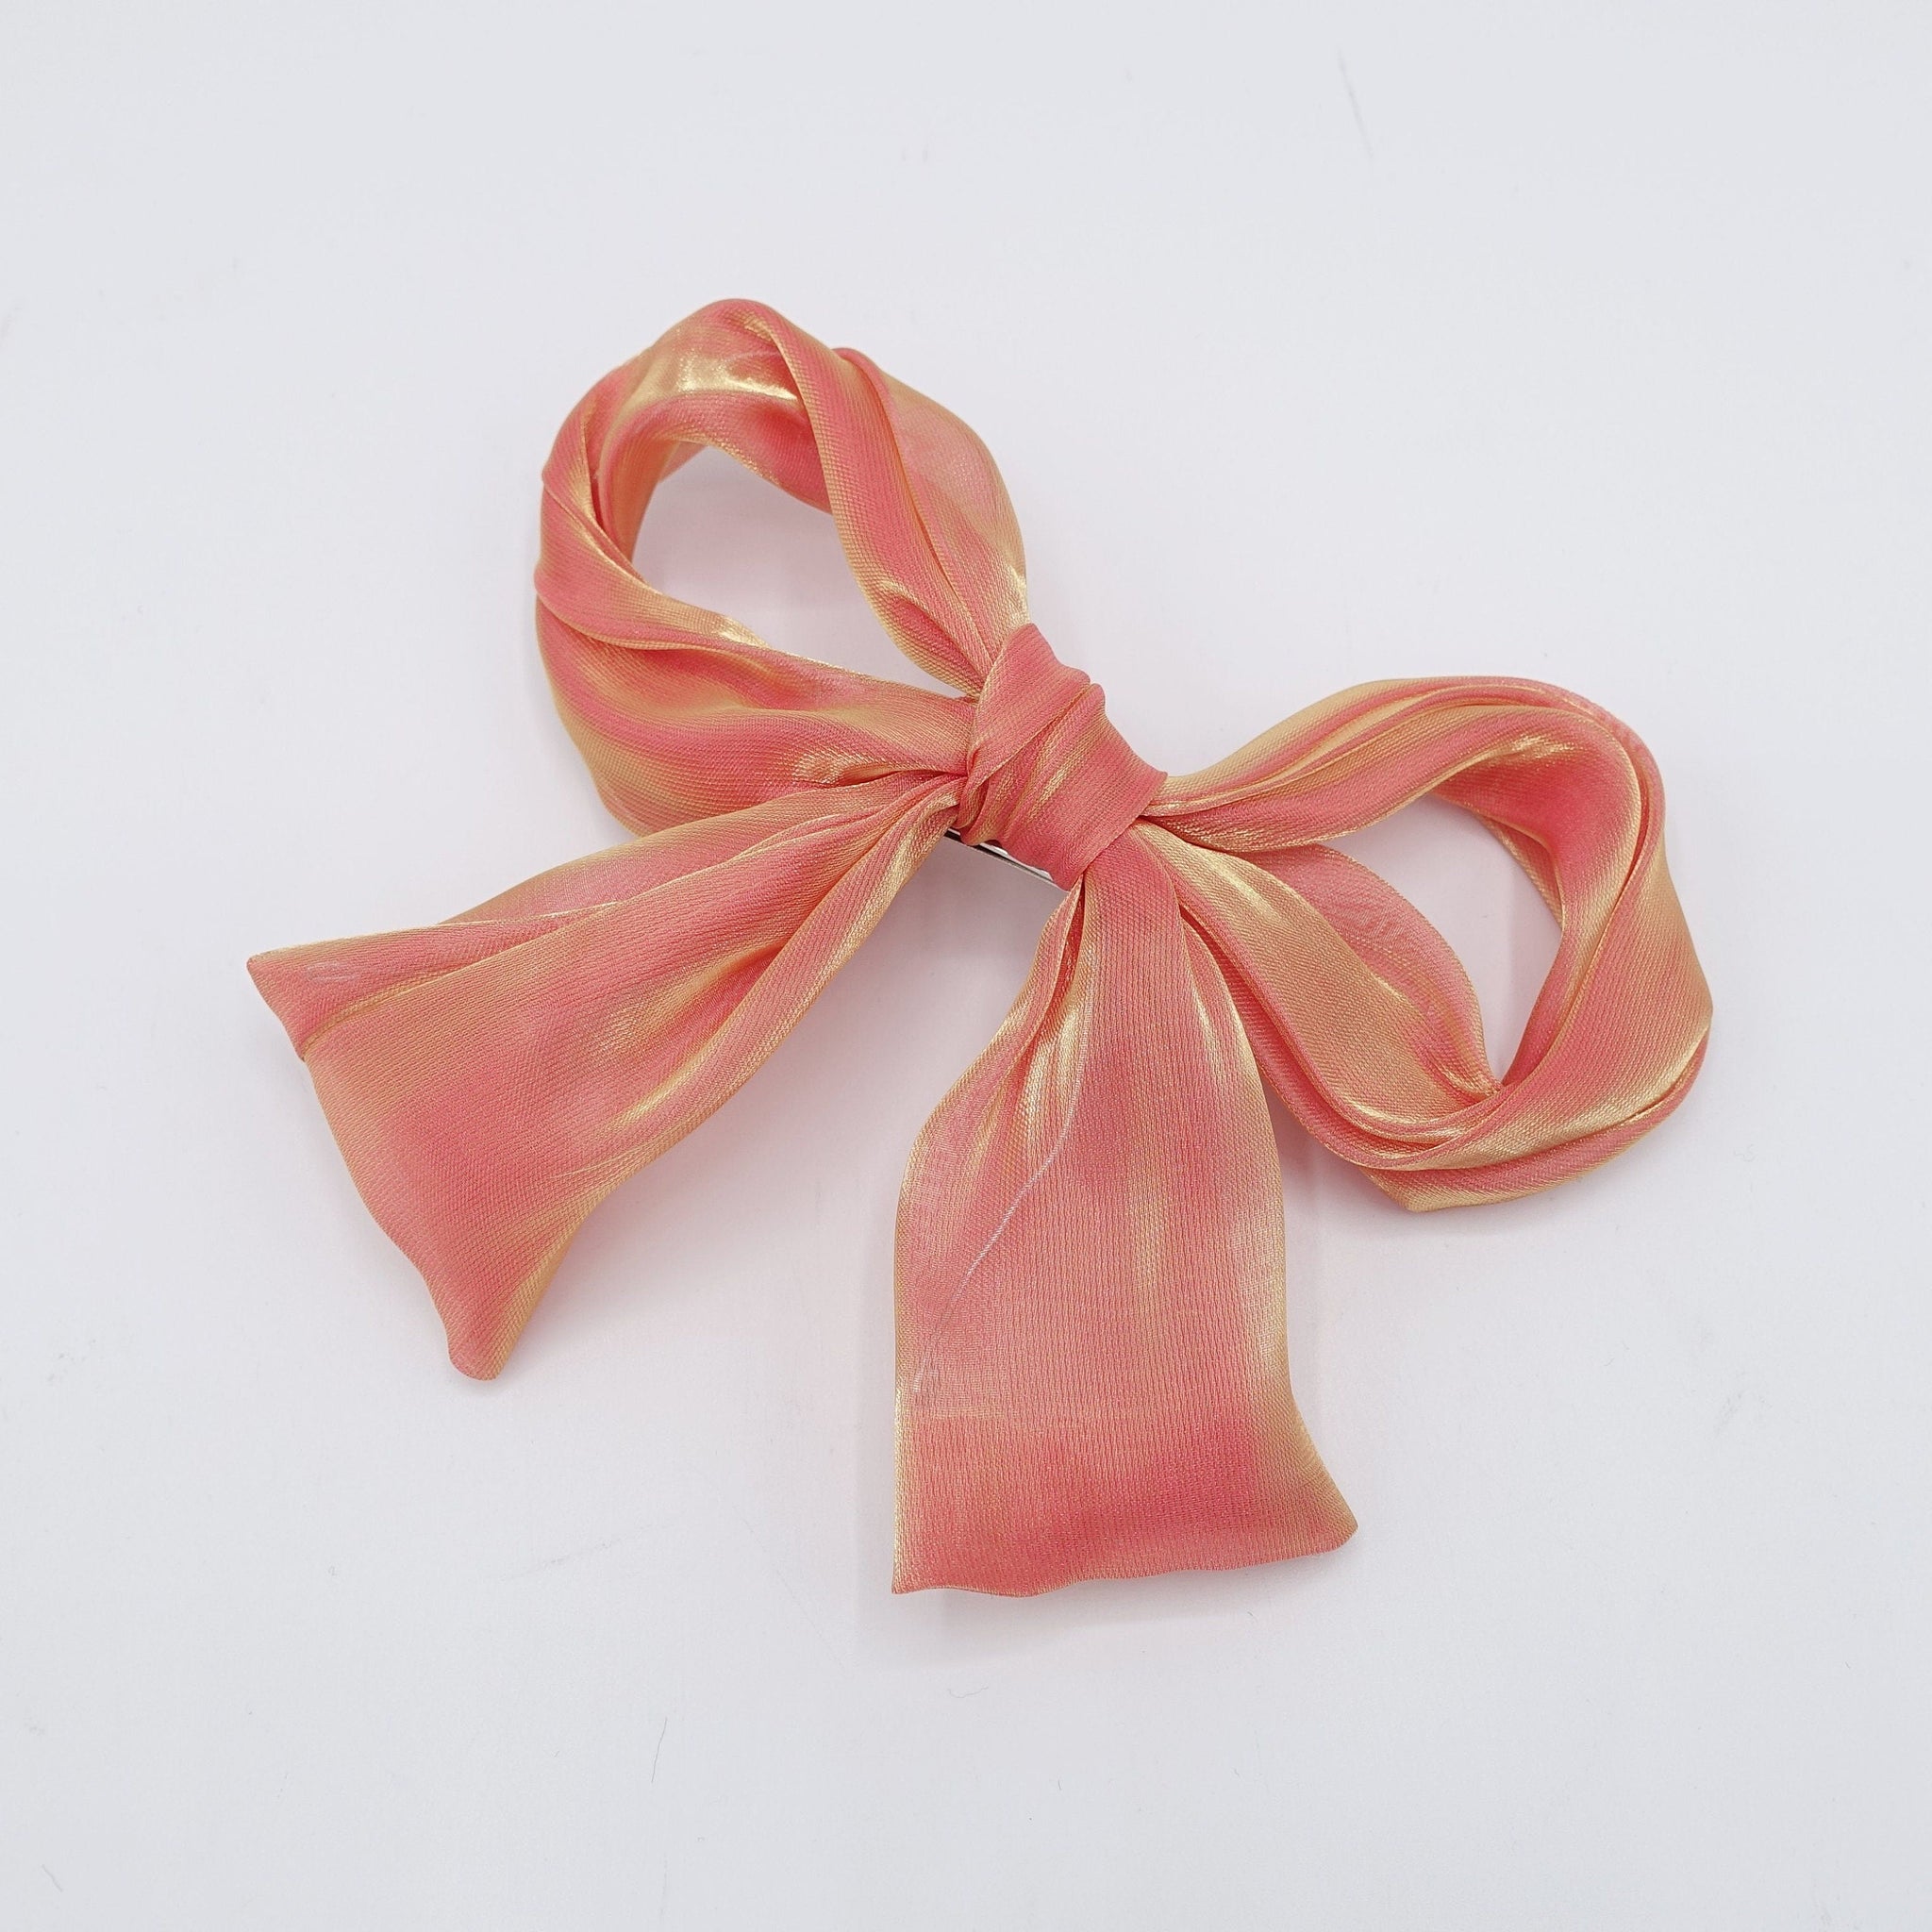 veryshine.com Barrette (Bow) Orange organza wired hair bow colorful translucent fabric tail knotted bow french barrette women hair accessory